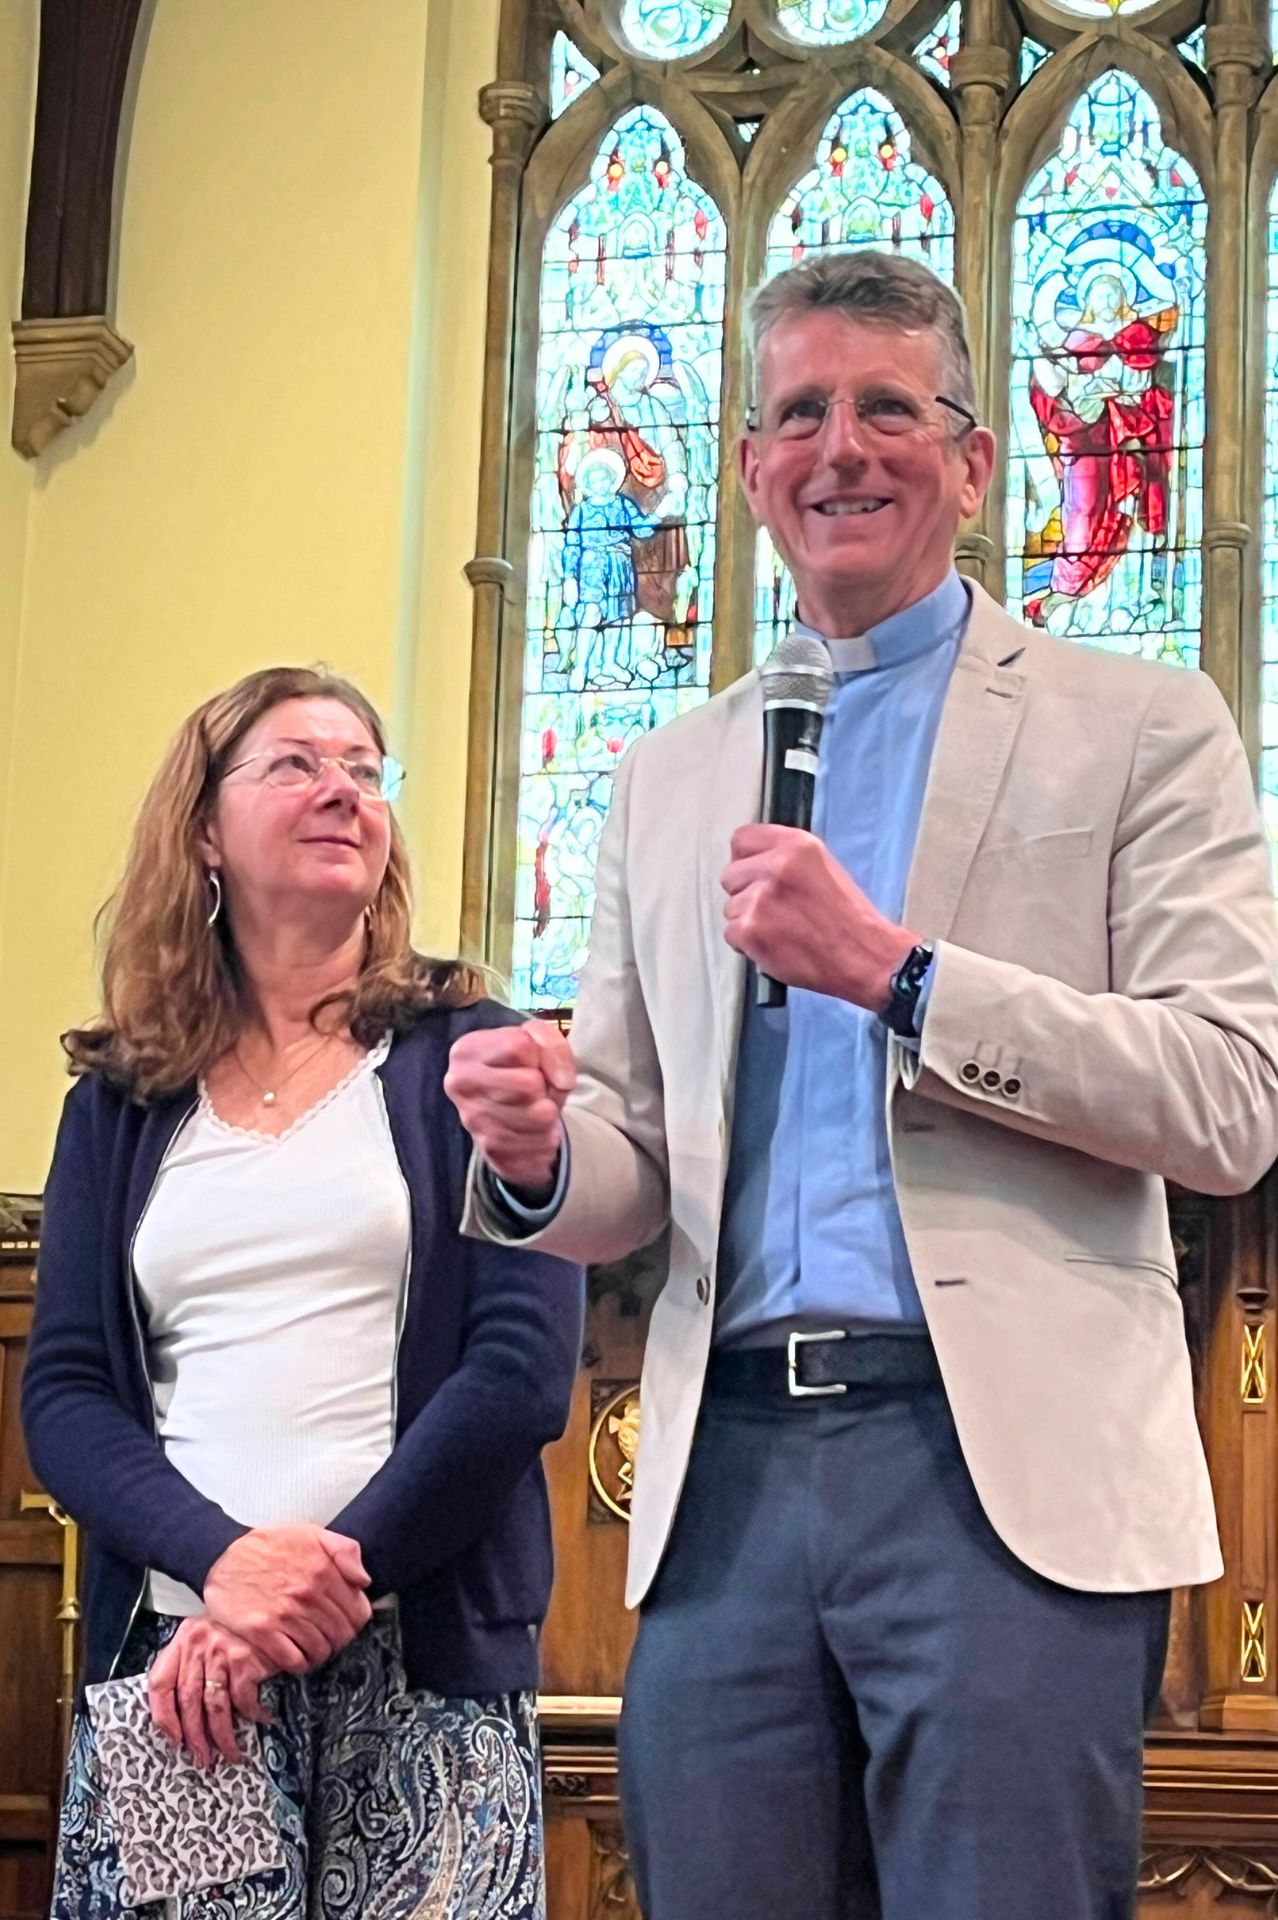 George and Jane Newton standing on the stage at Holy Trinity Aldershot being interviewed